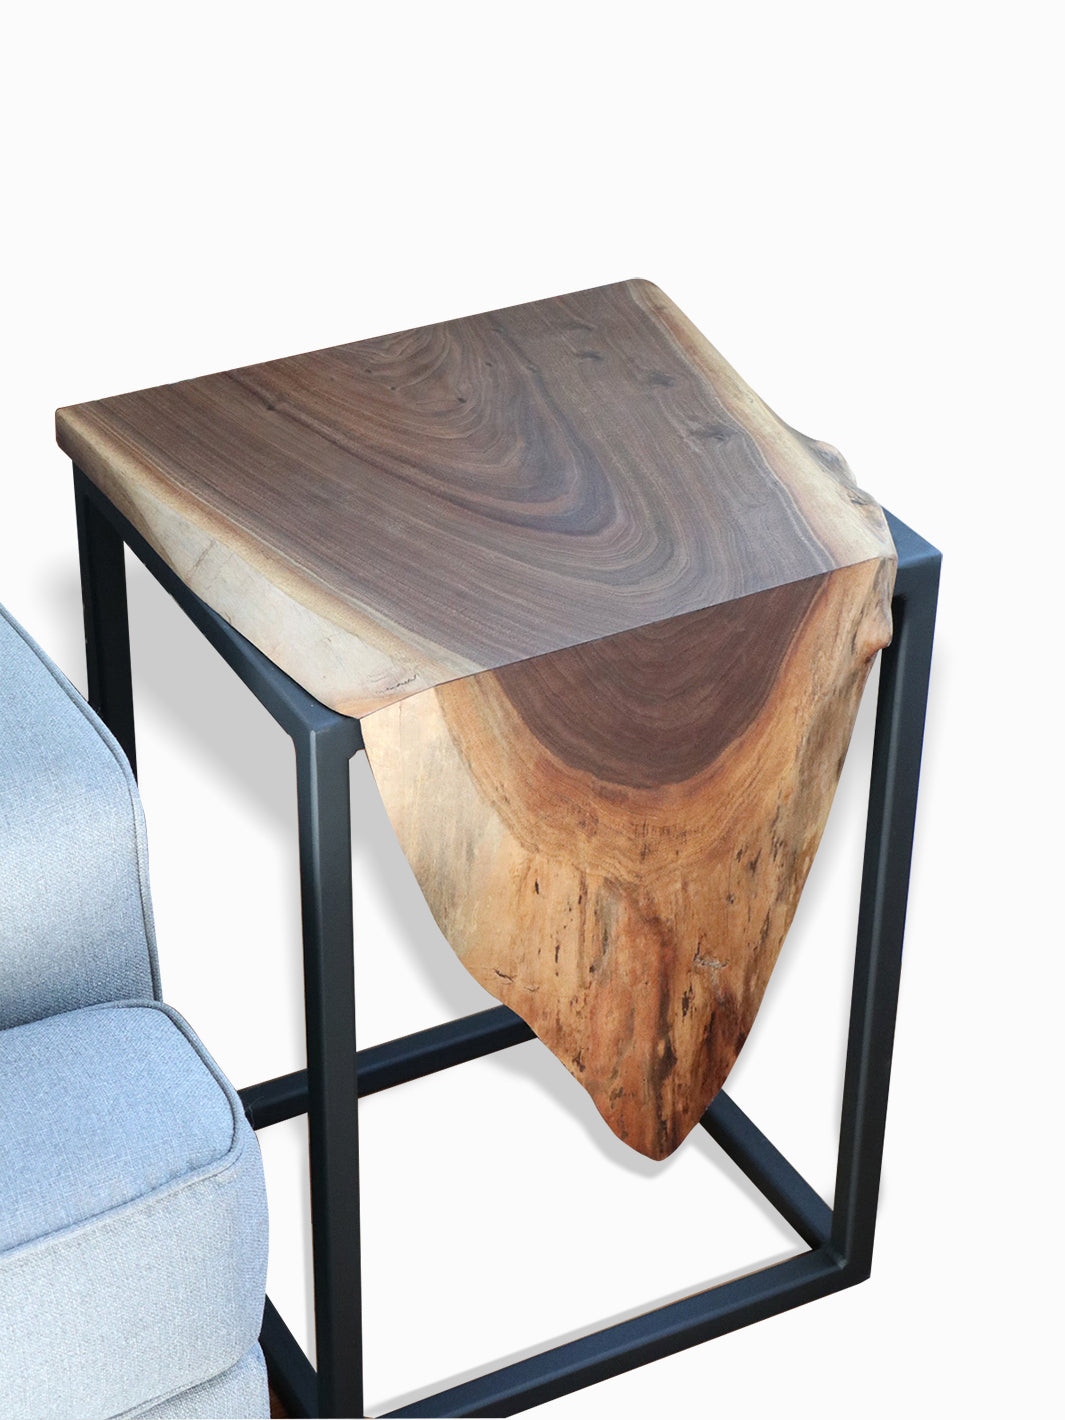 Live Edge Walnut Waterfall Cube Side Table Earthly Comfort Side Tables 1820-1